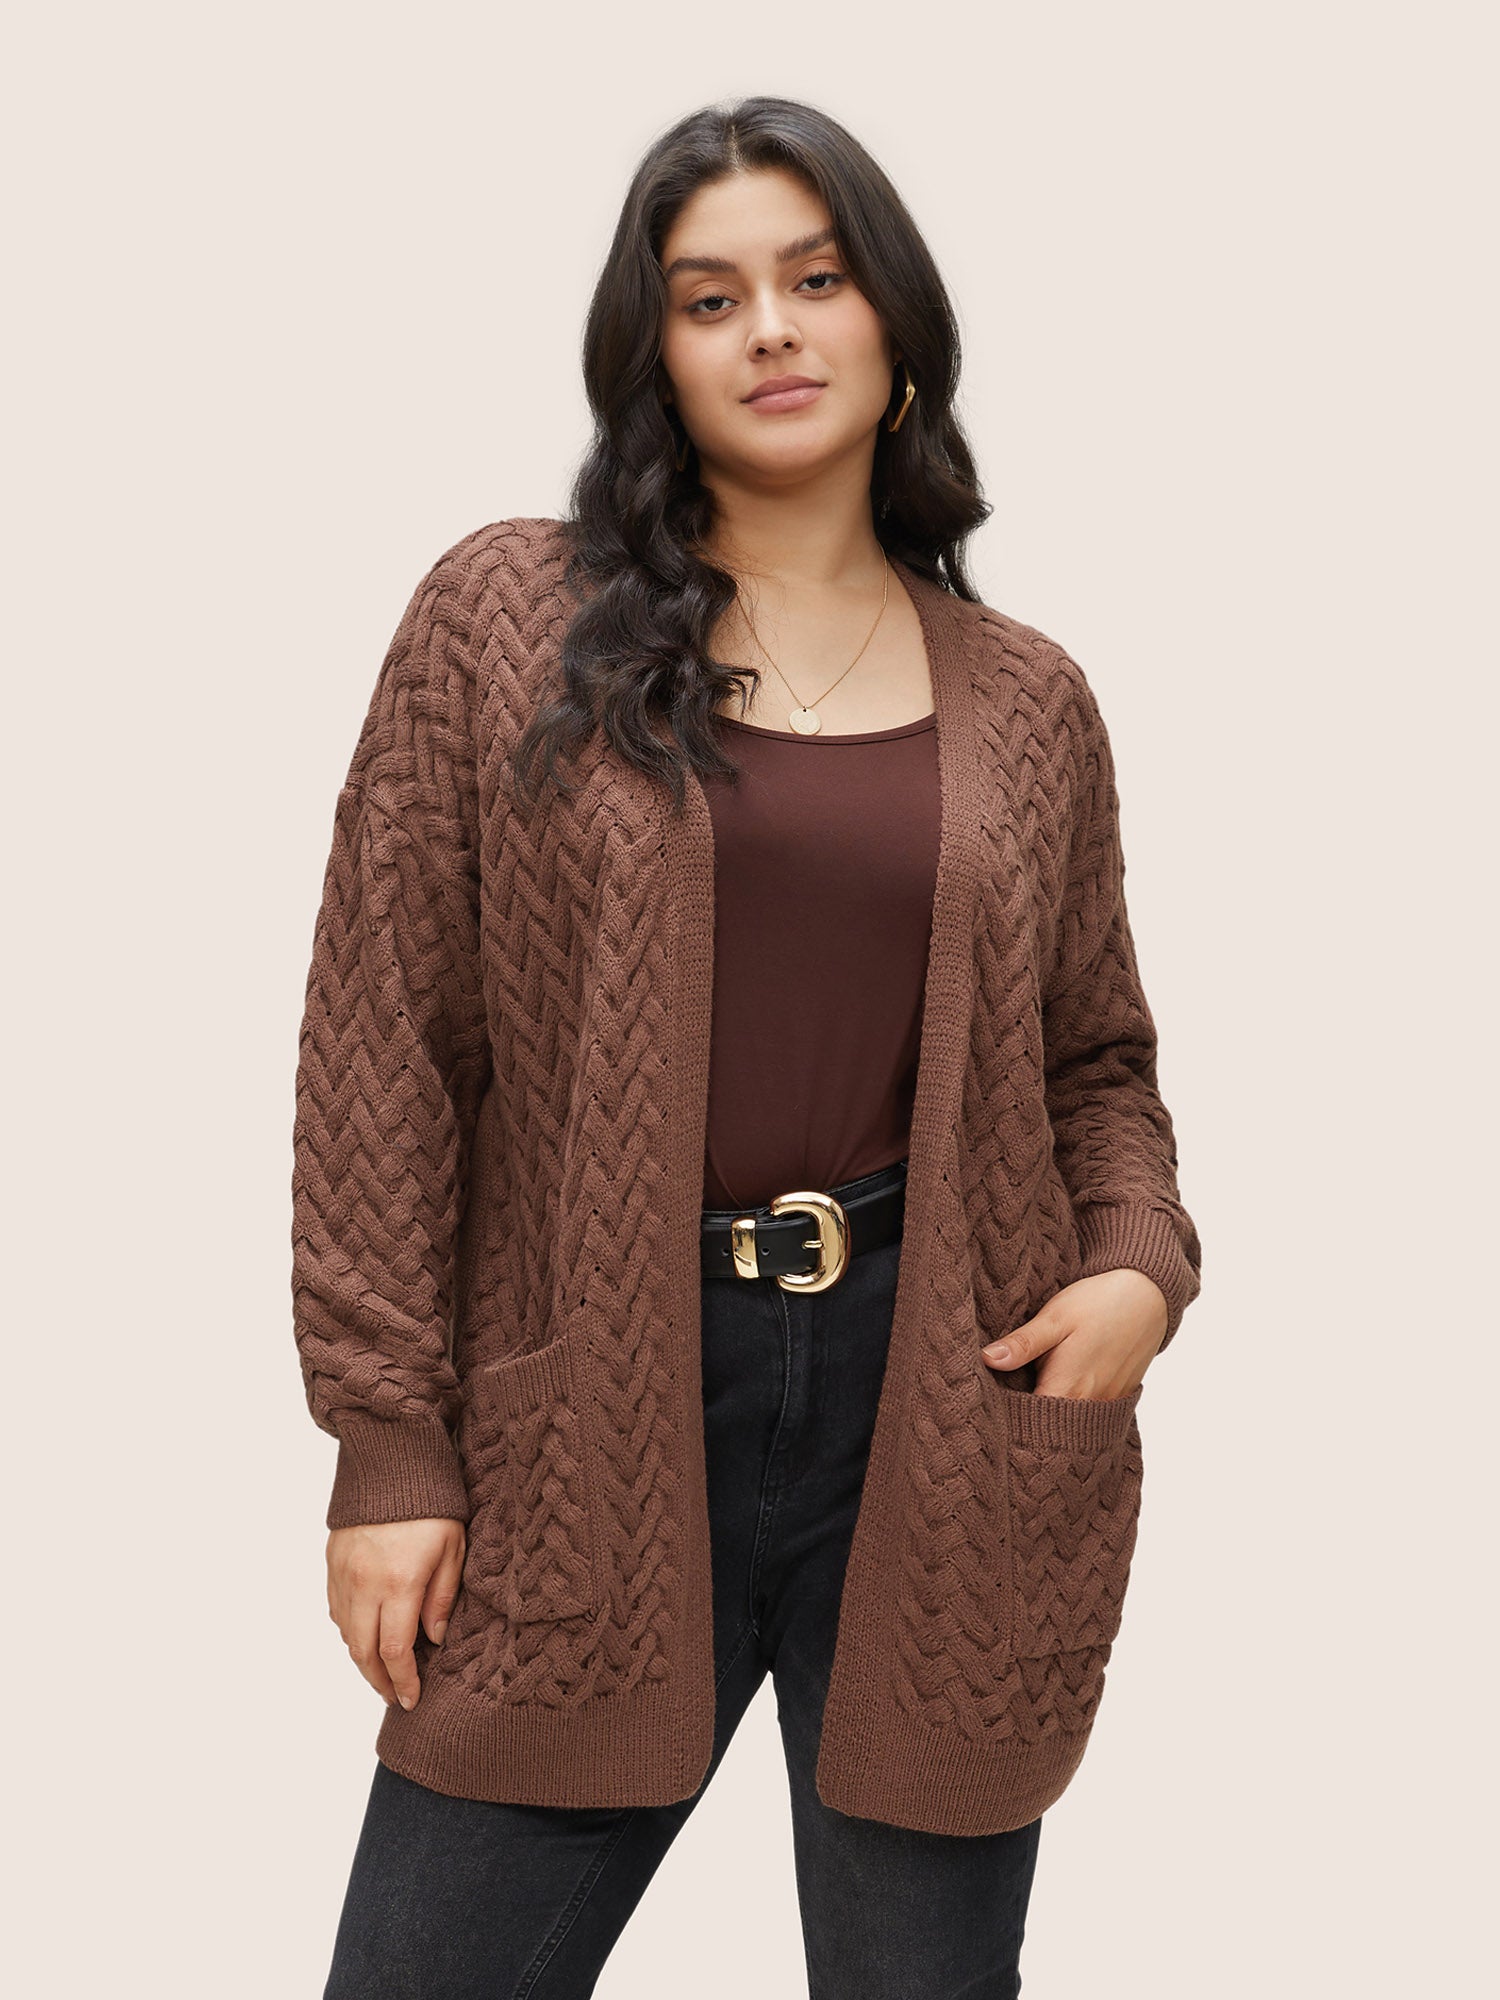 

Plus Size Cardigans | Solid Open Front Pocket Crochet Cardigan | BloomChic, Burgundy